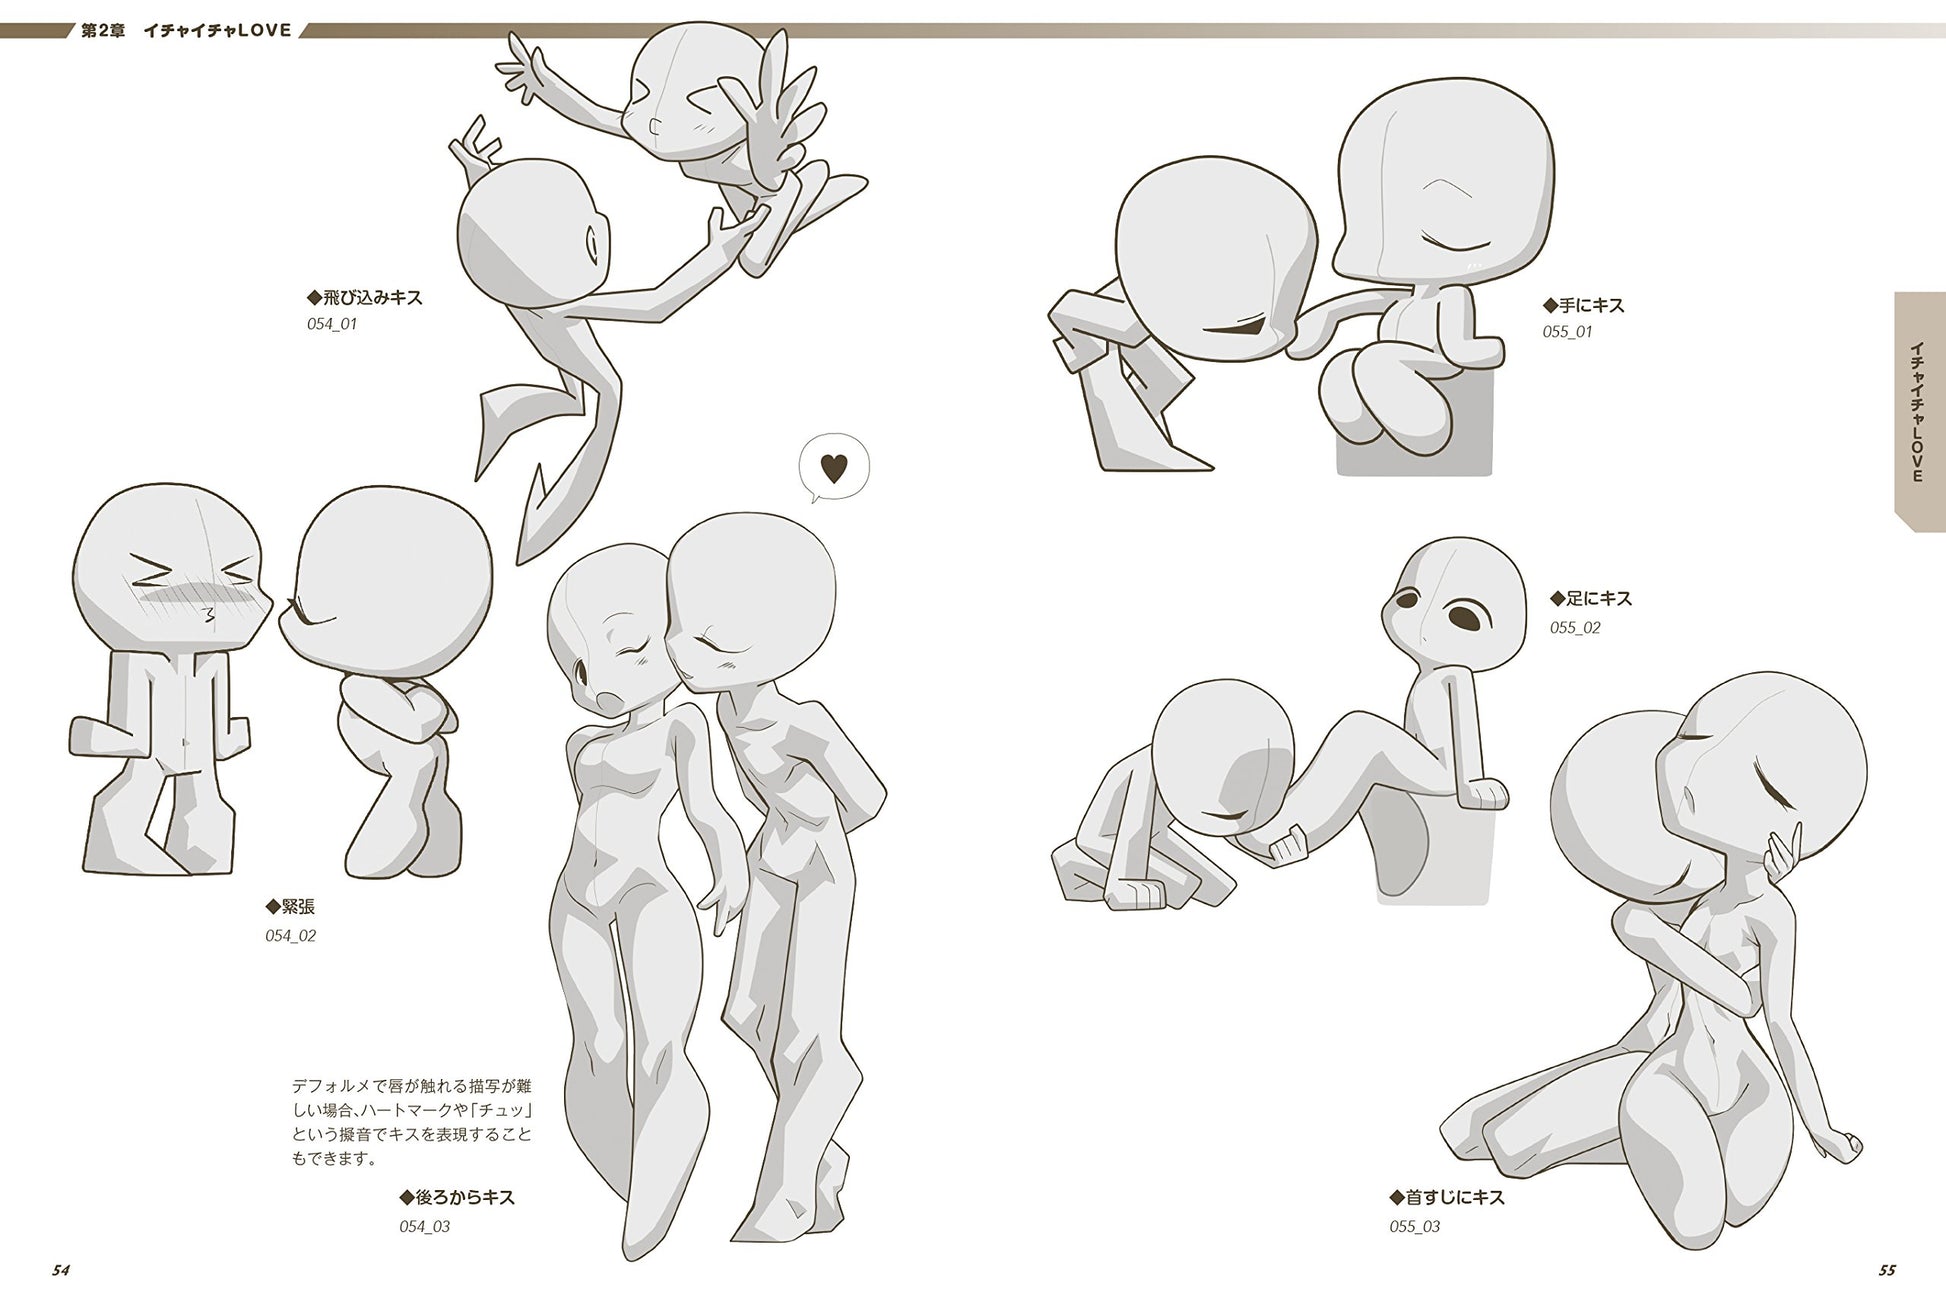 How to draw Manga Anime Super Deformed Pose Collection character variations